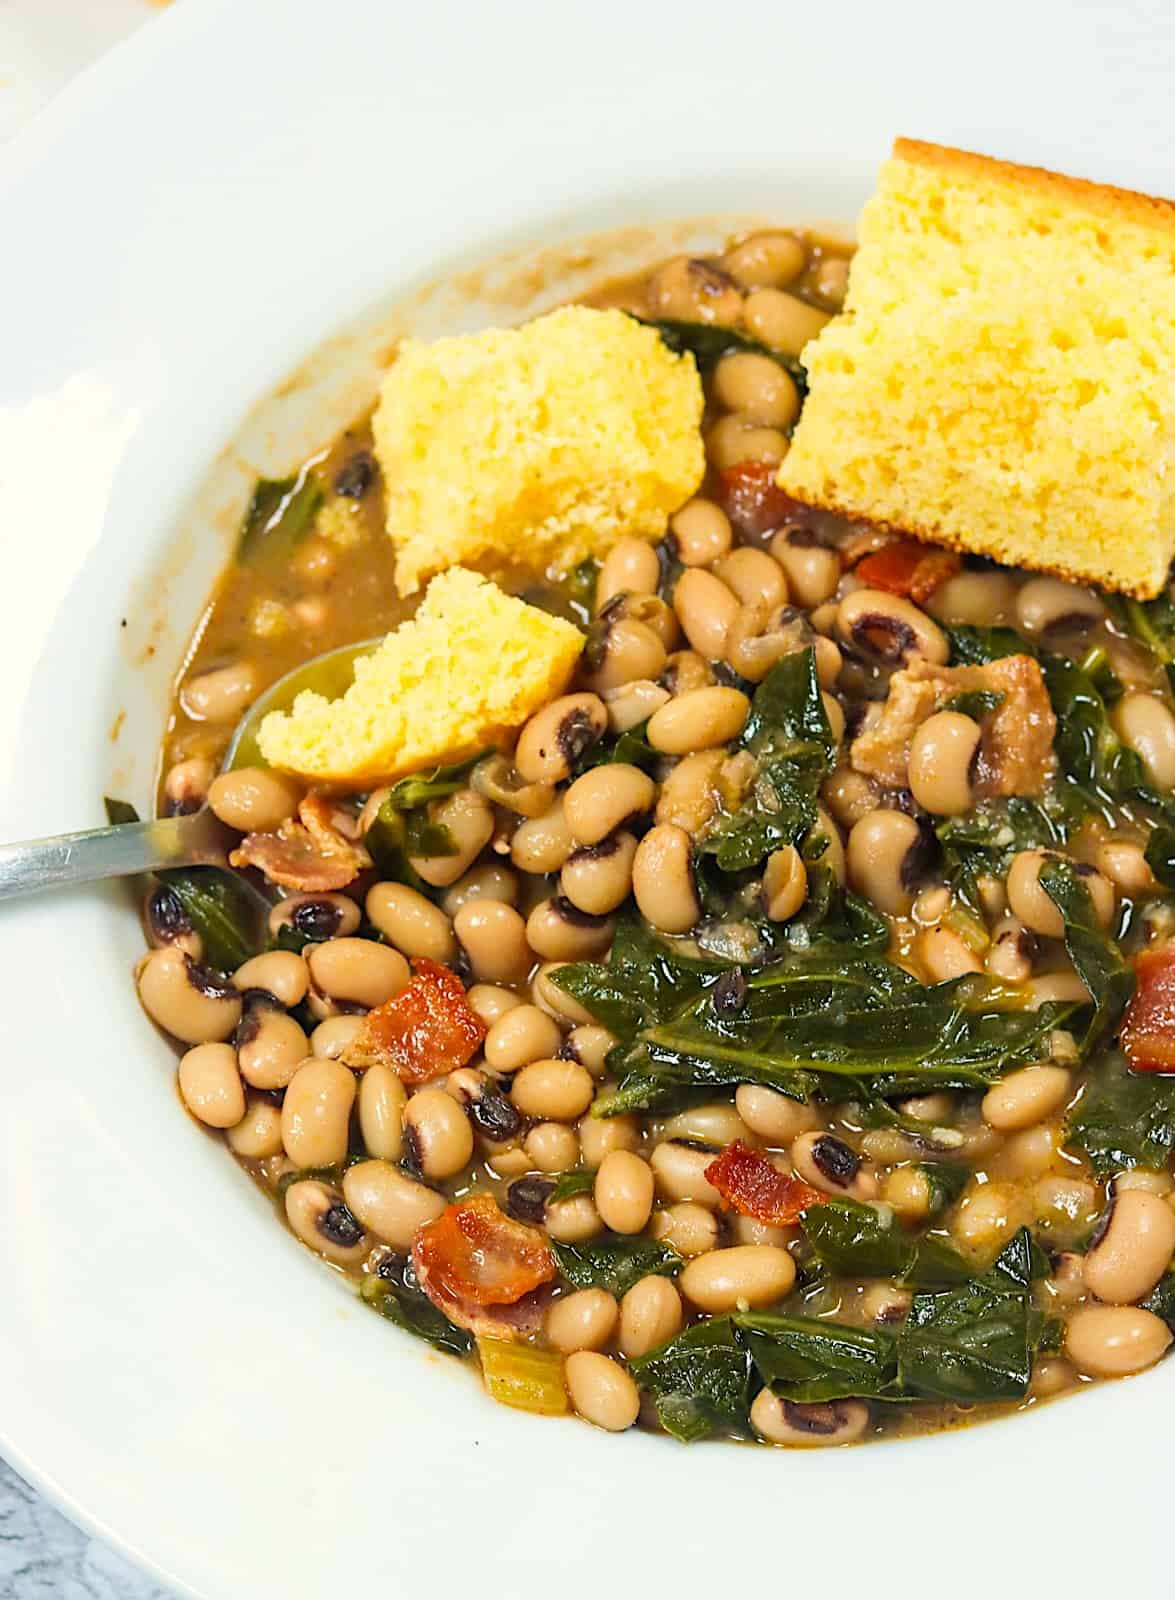 Diving into an insanely delicious bowl of Black-Eyed Peas and Collard Greens 